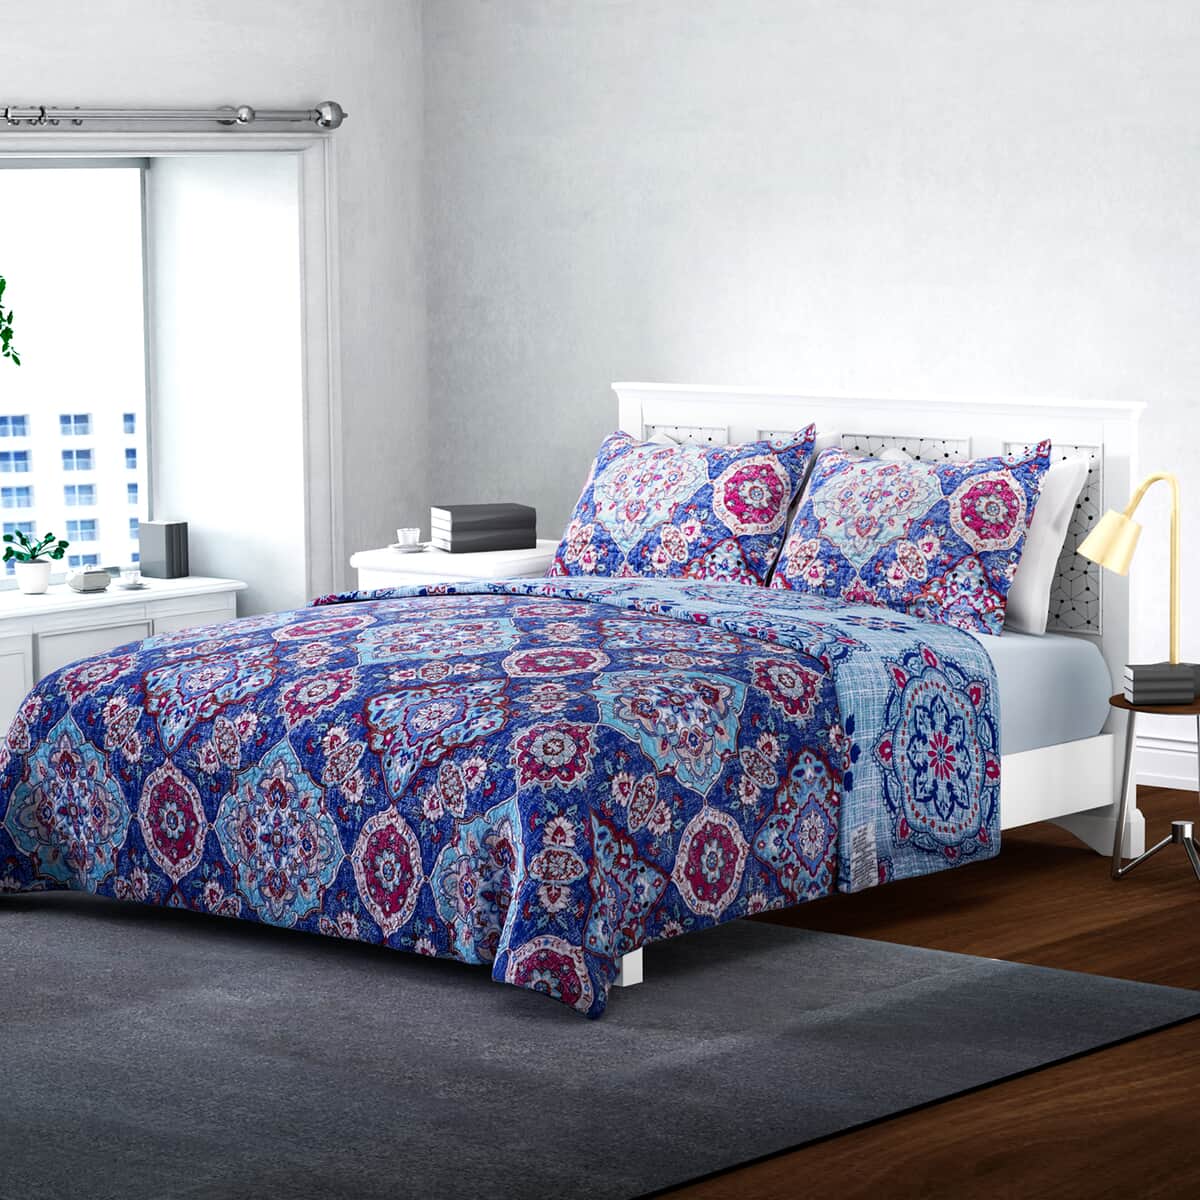 Homesmart Blue and Red Printed Microfiber Quilt (Queen) and Set of 2 Shams, Quilt Set, Comforter Set, Bed Comforters image number 0